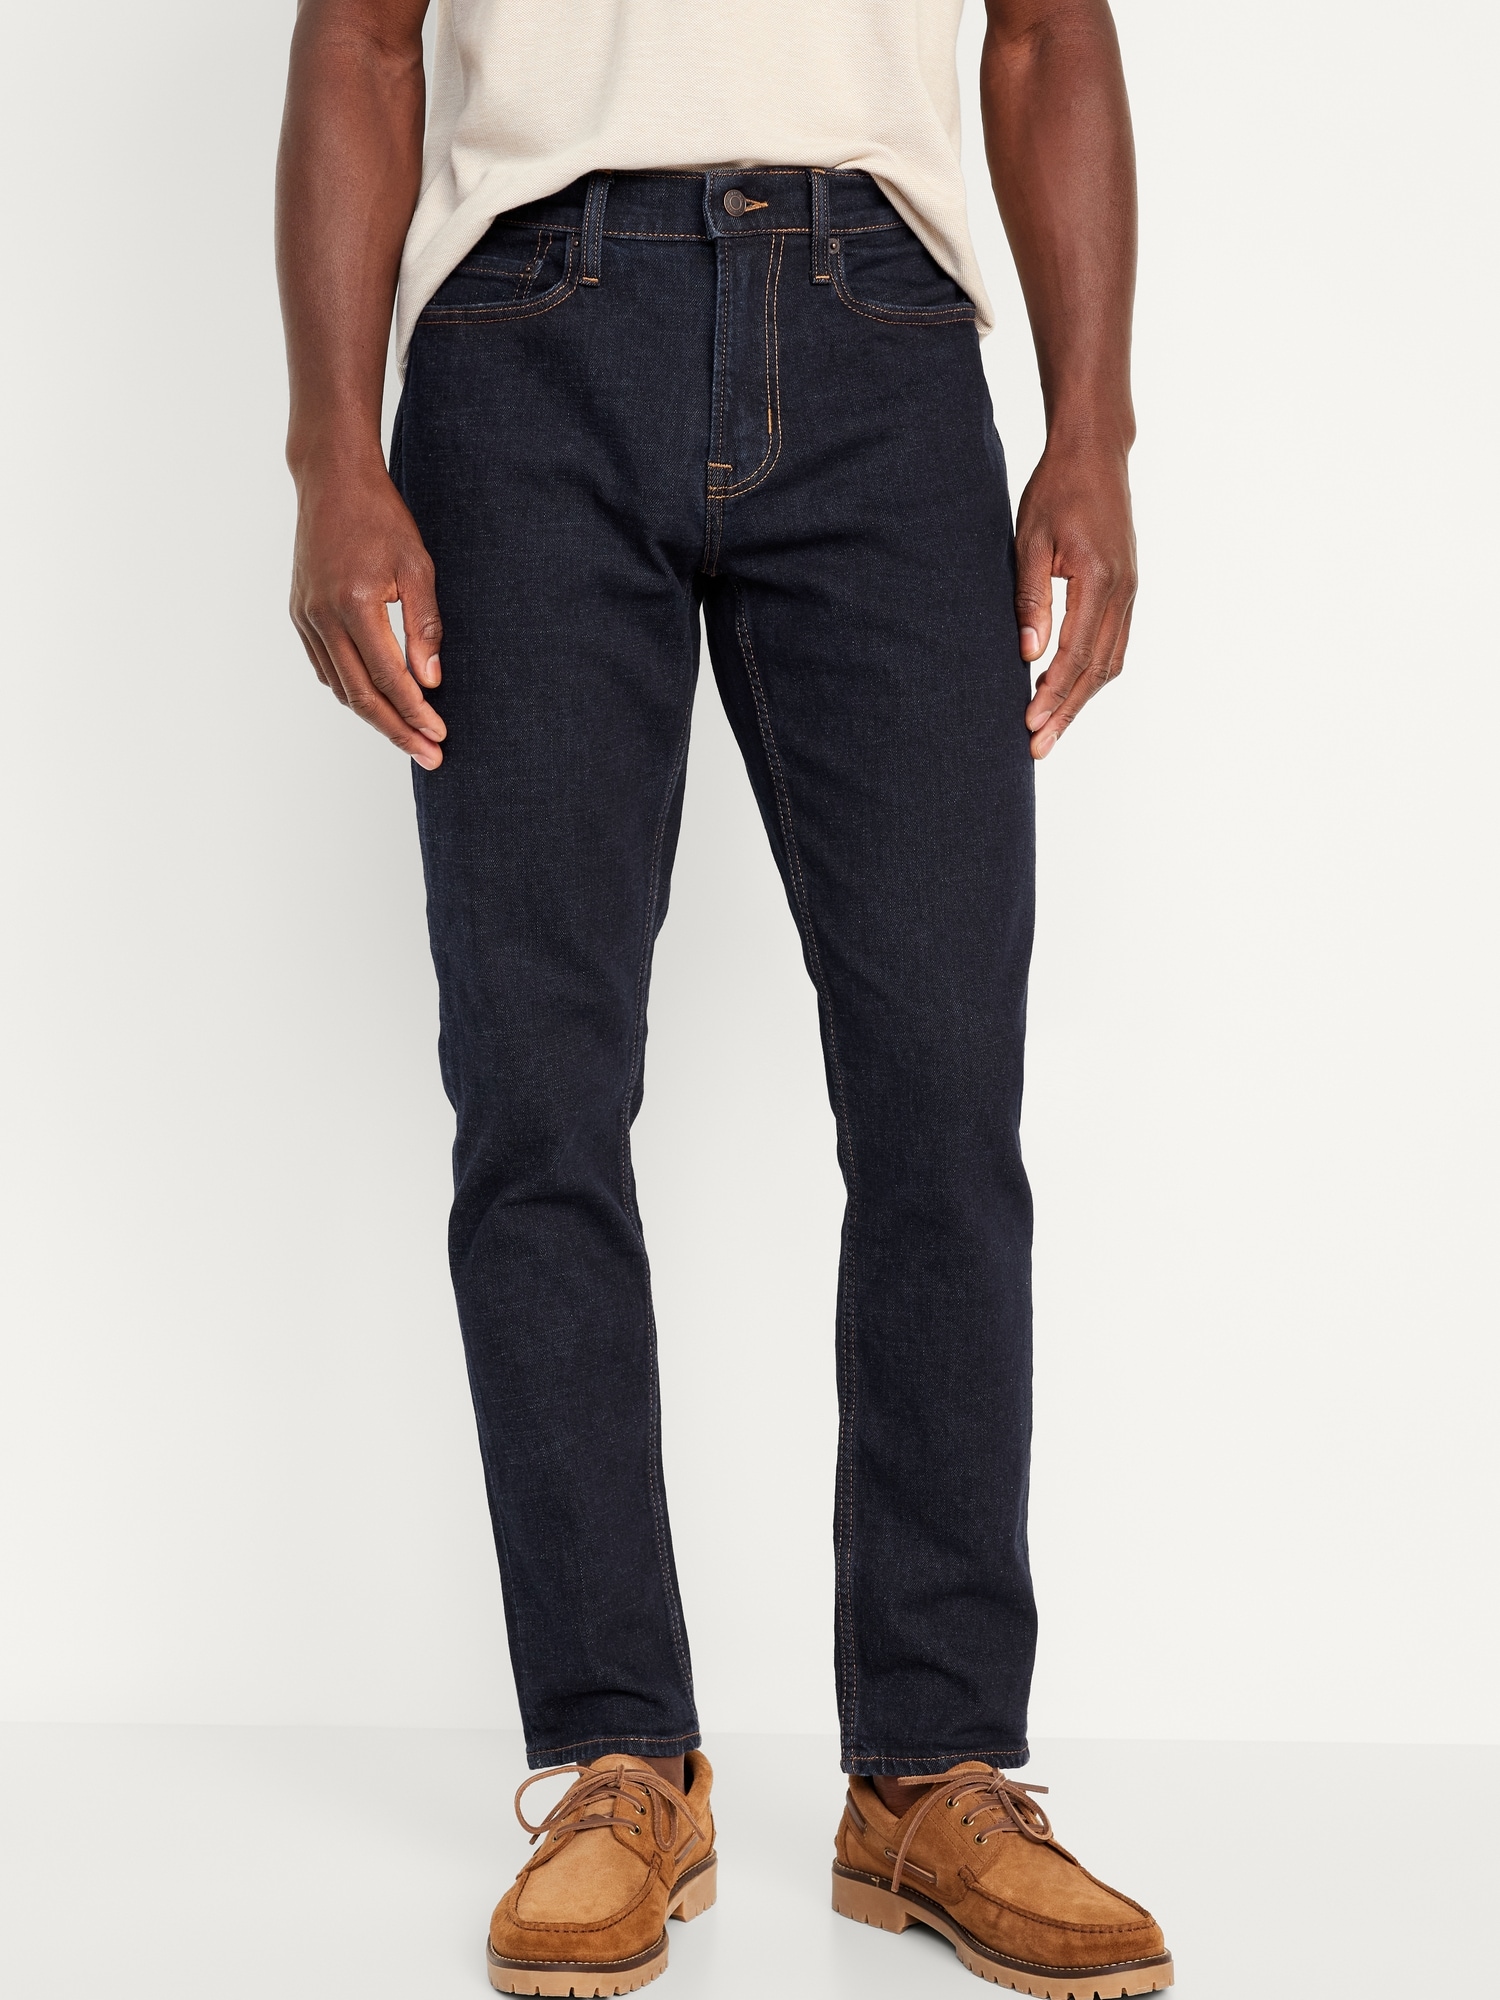 Relaxed Slim Taper Jeans | Old Navy